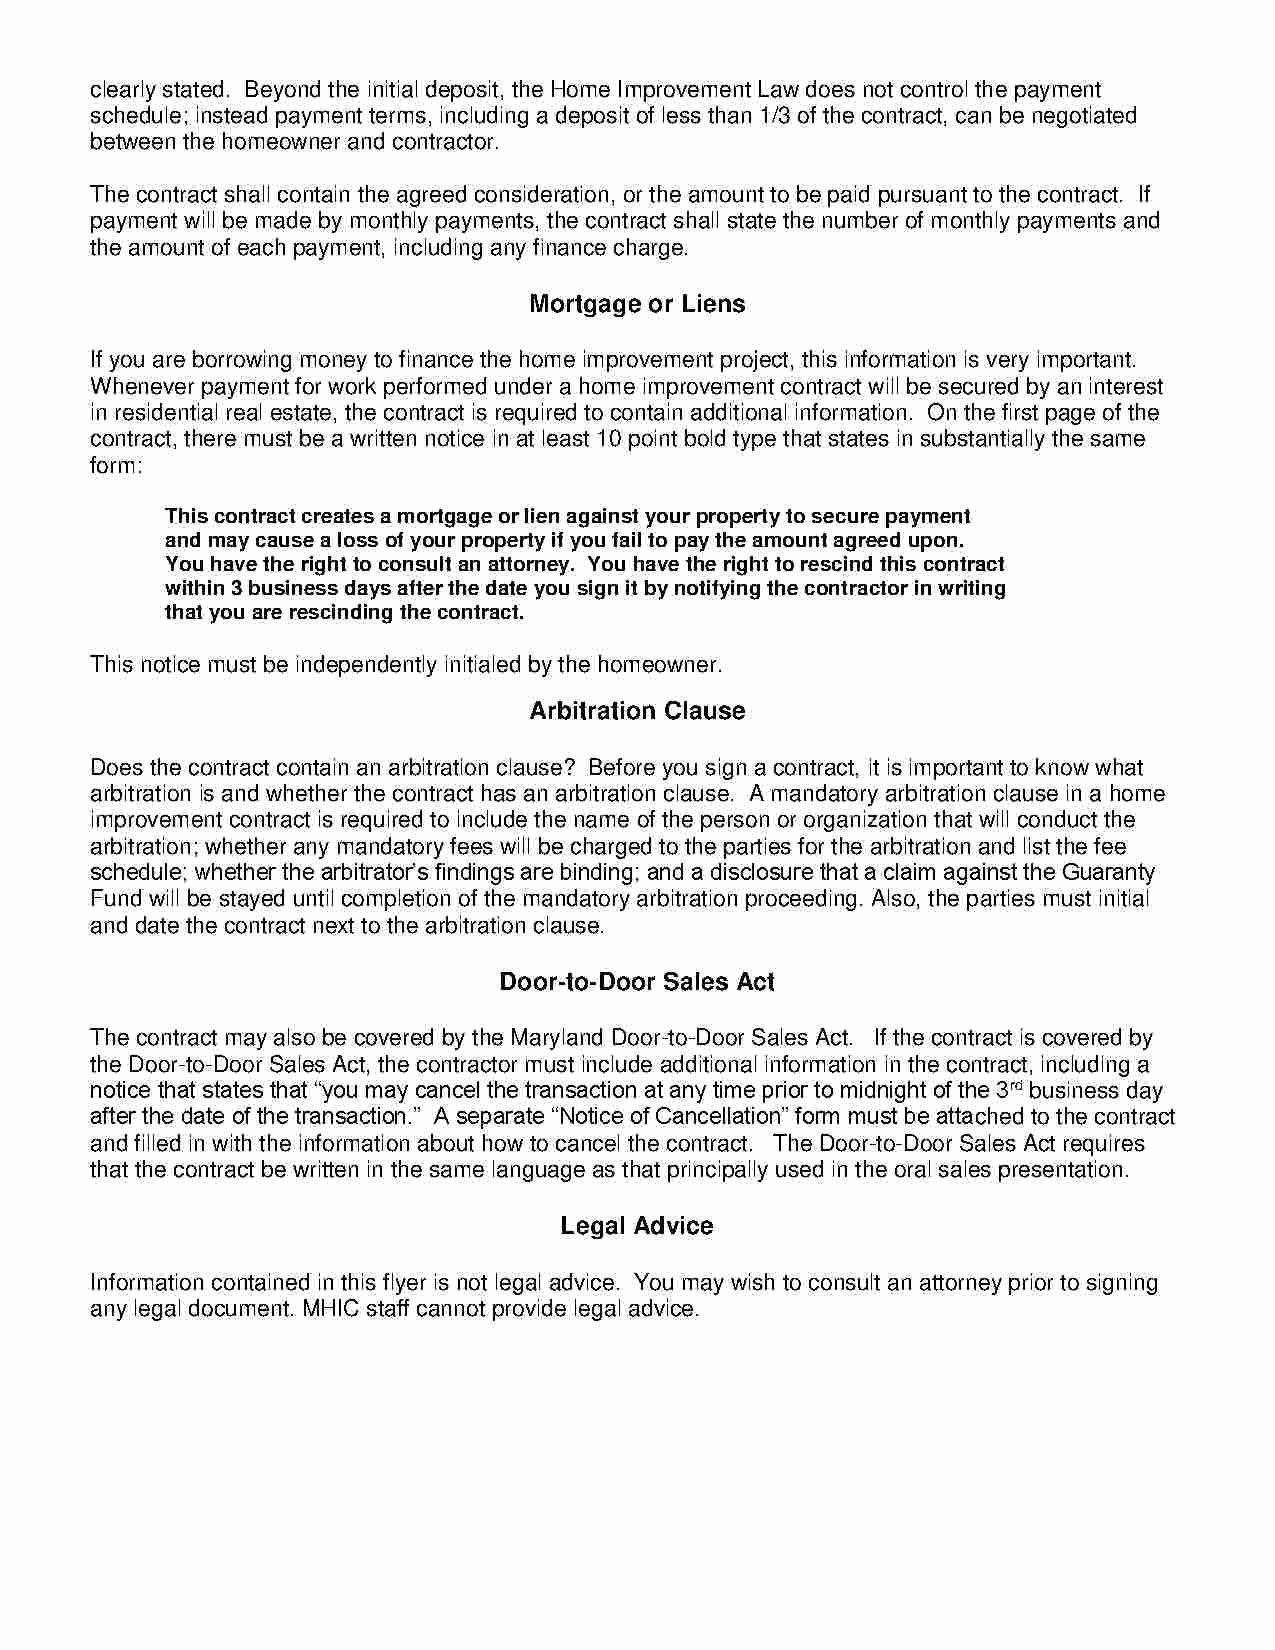 Home Improvement Contract Template Lovely Download Home Improvement Contract Style 18 Template for Free at Templates Hunter